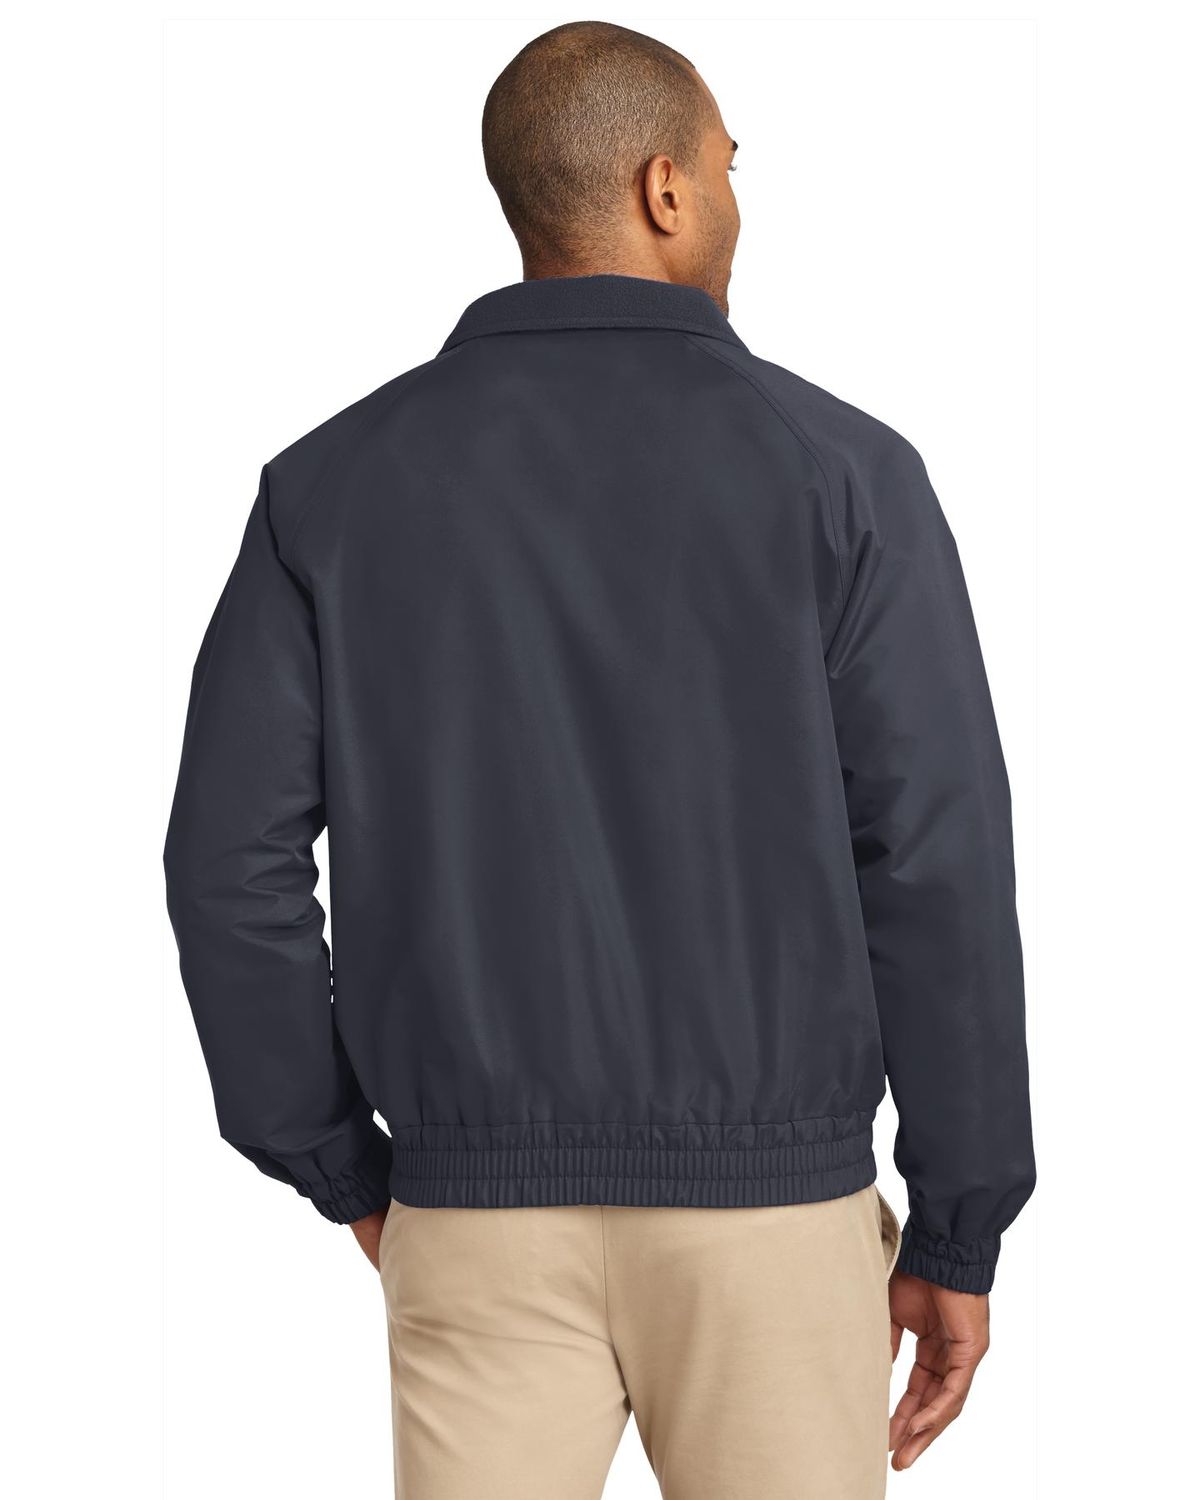 'Port Authority J329 Lightweight Charger Jacket'